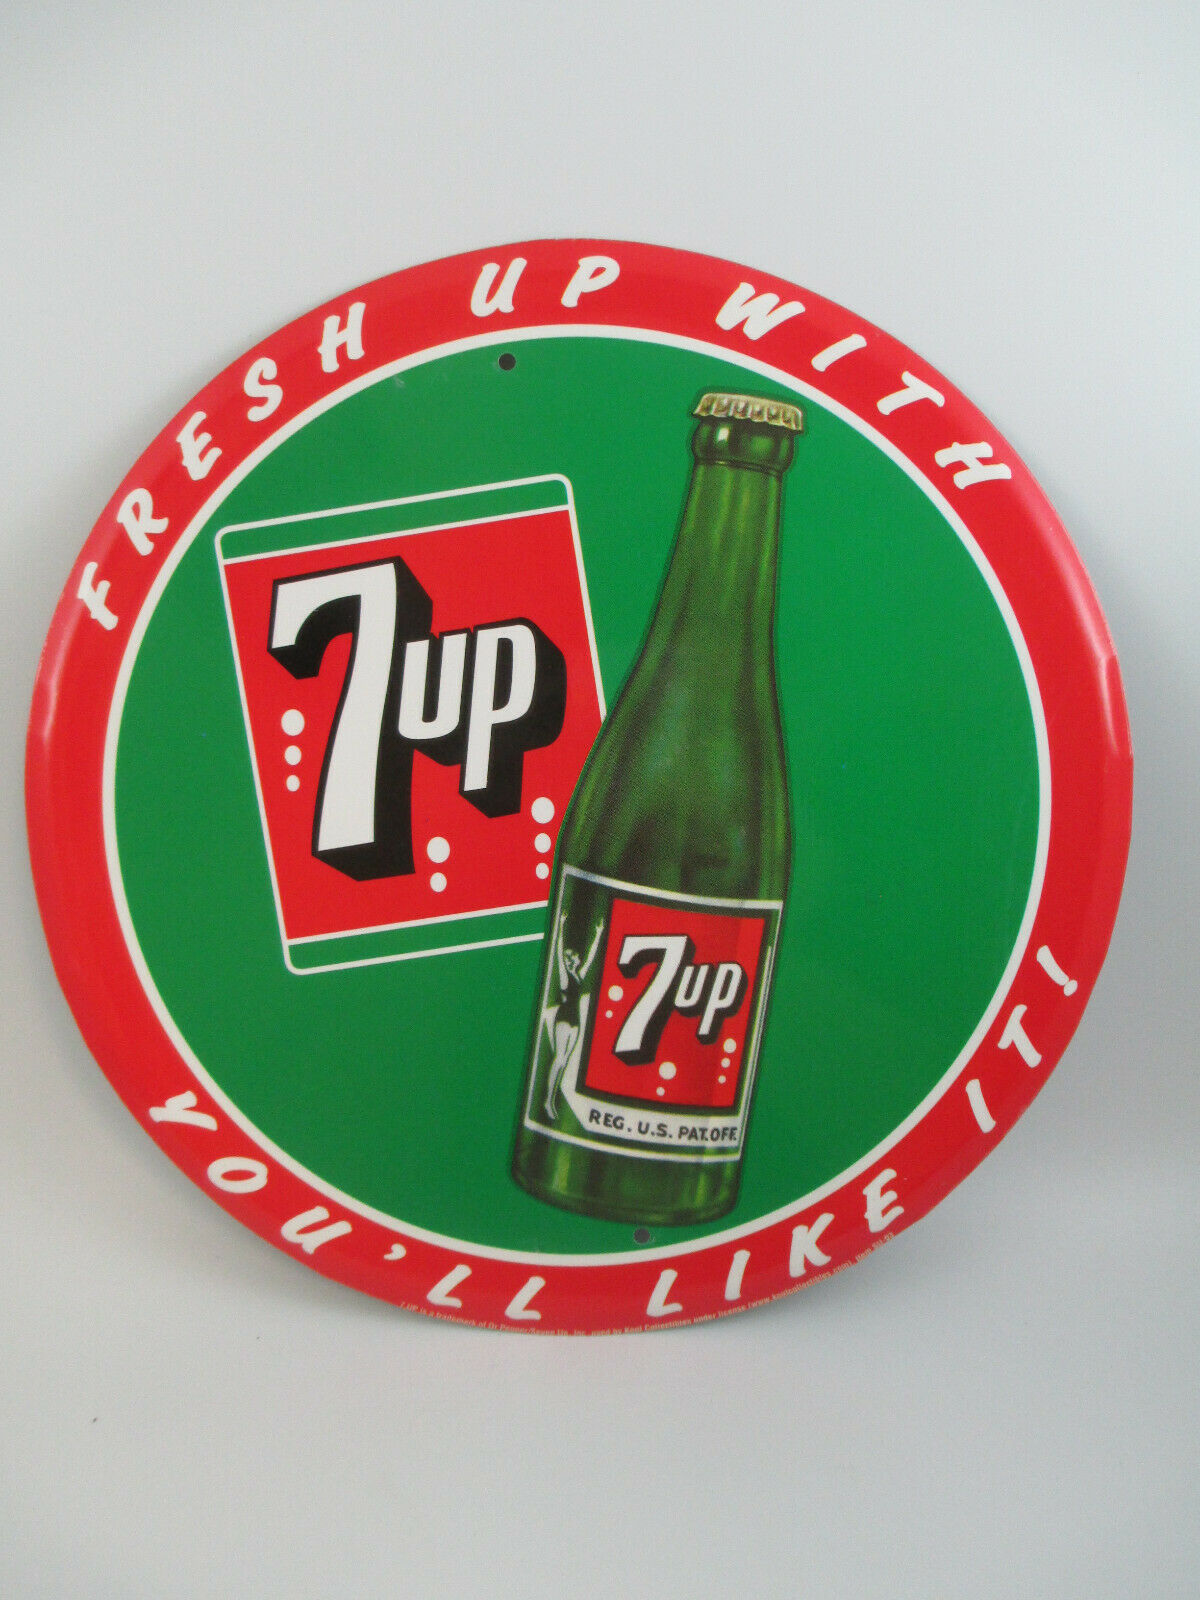 7-Up Round Disc Metal Sign Green and Red Fresh Up You'll Like It Retro Soda - $10.89